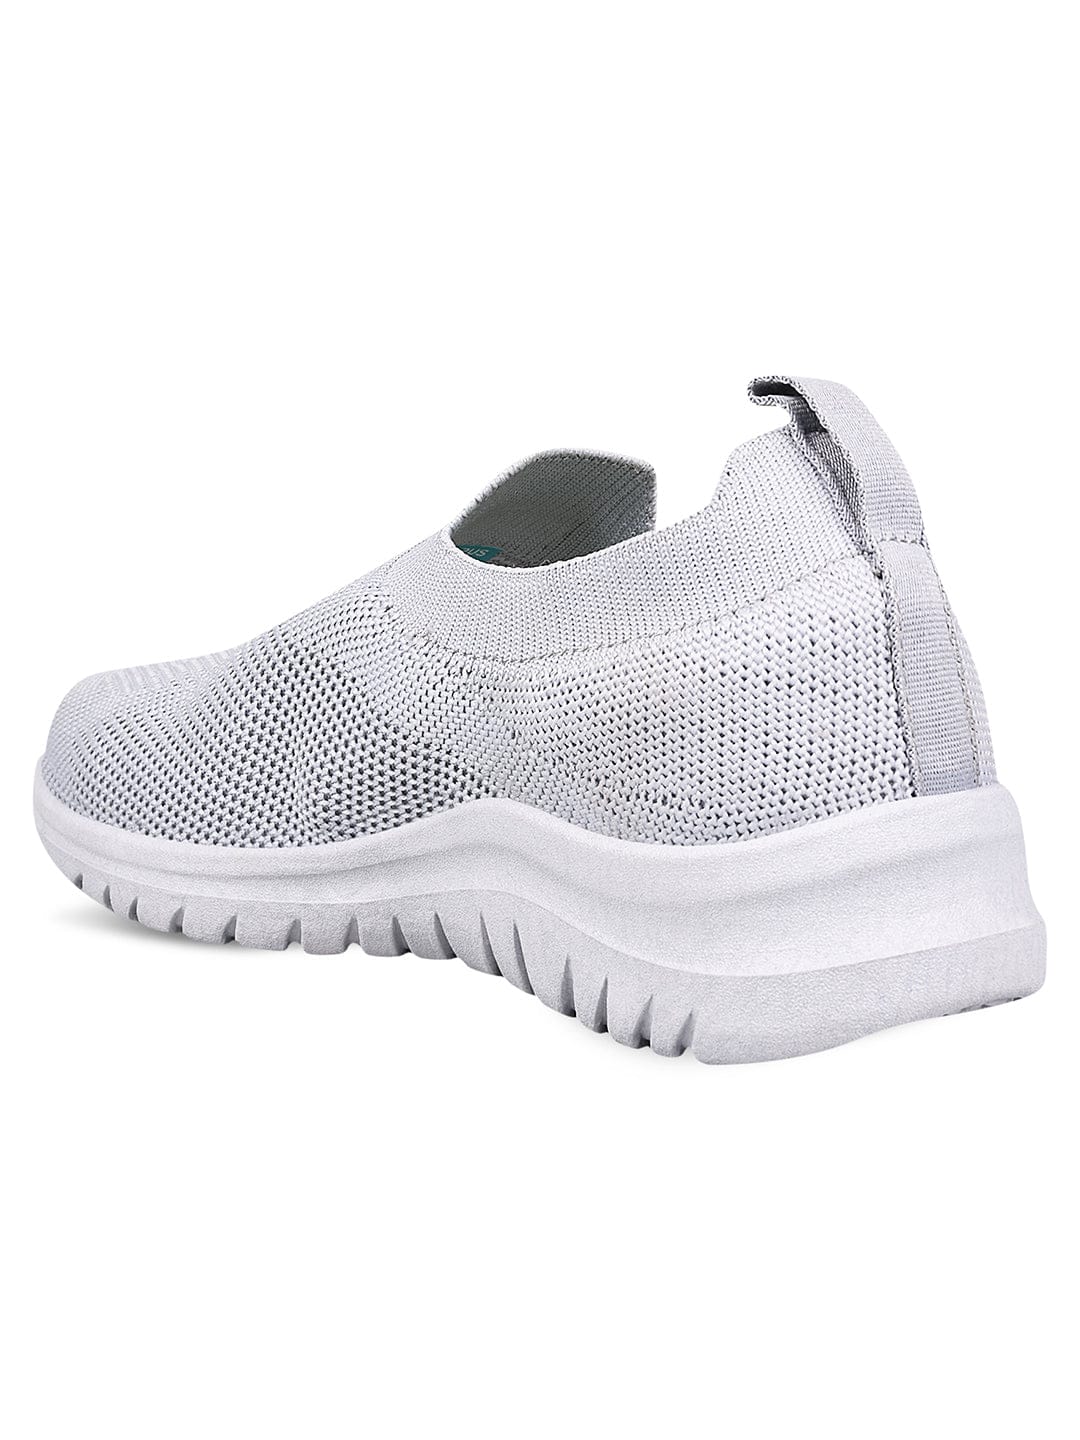 Men's Casual Running Shoes Tennis Breathable Non-slip Sneakers Gym Walking  size | eBay